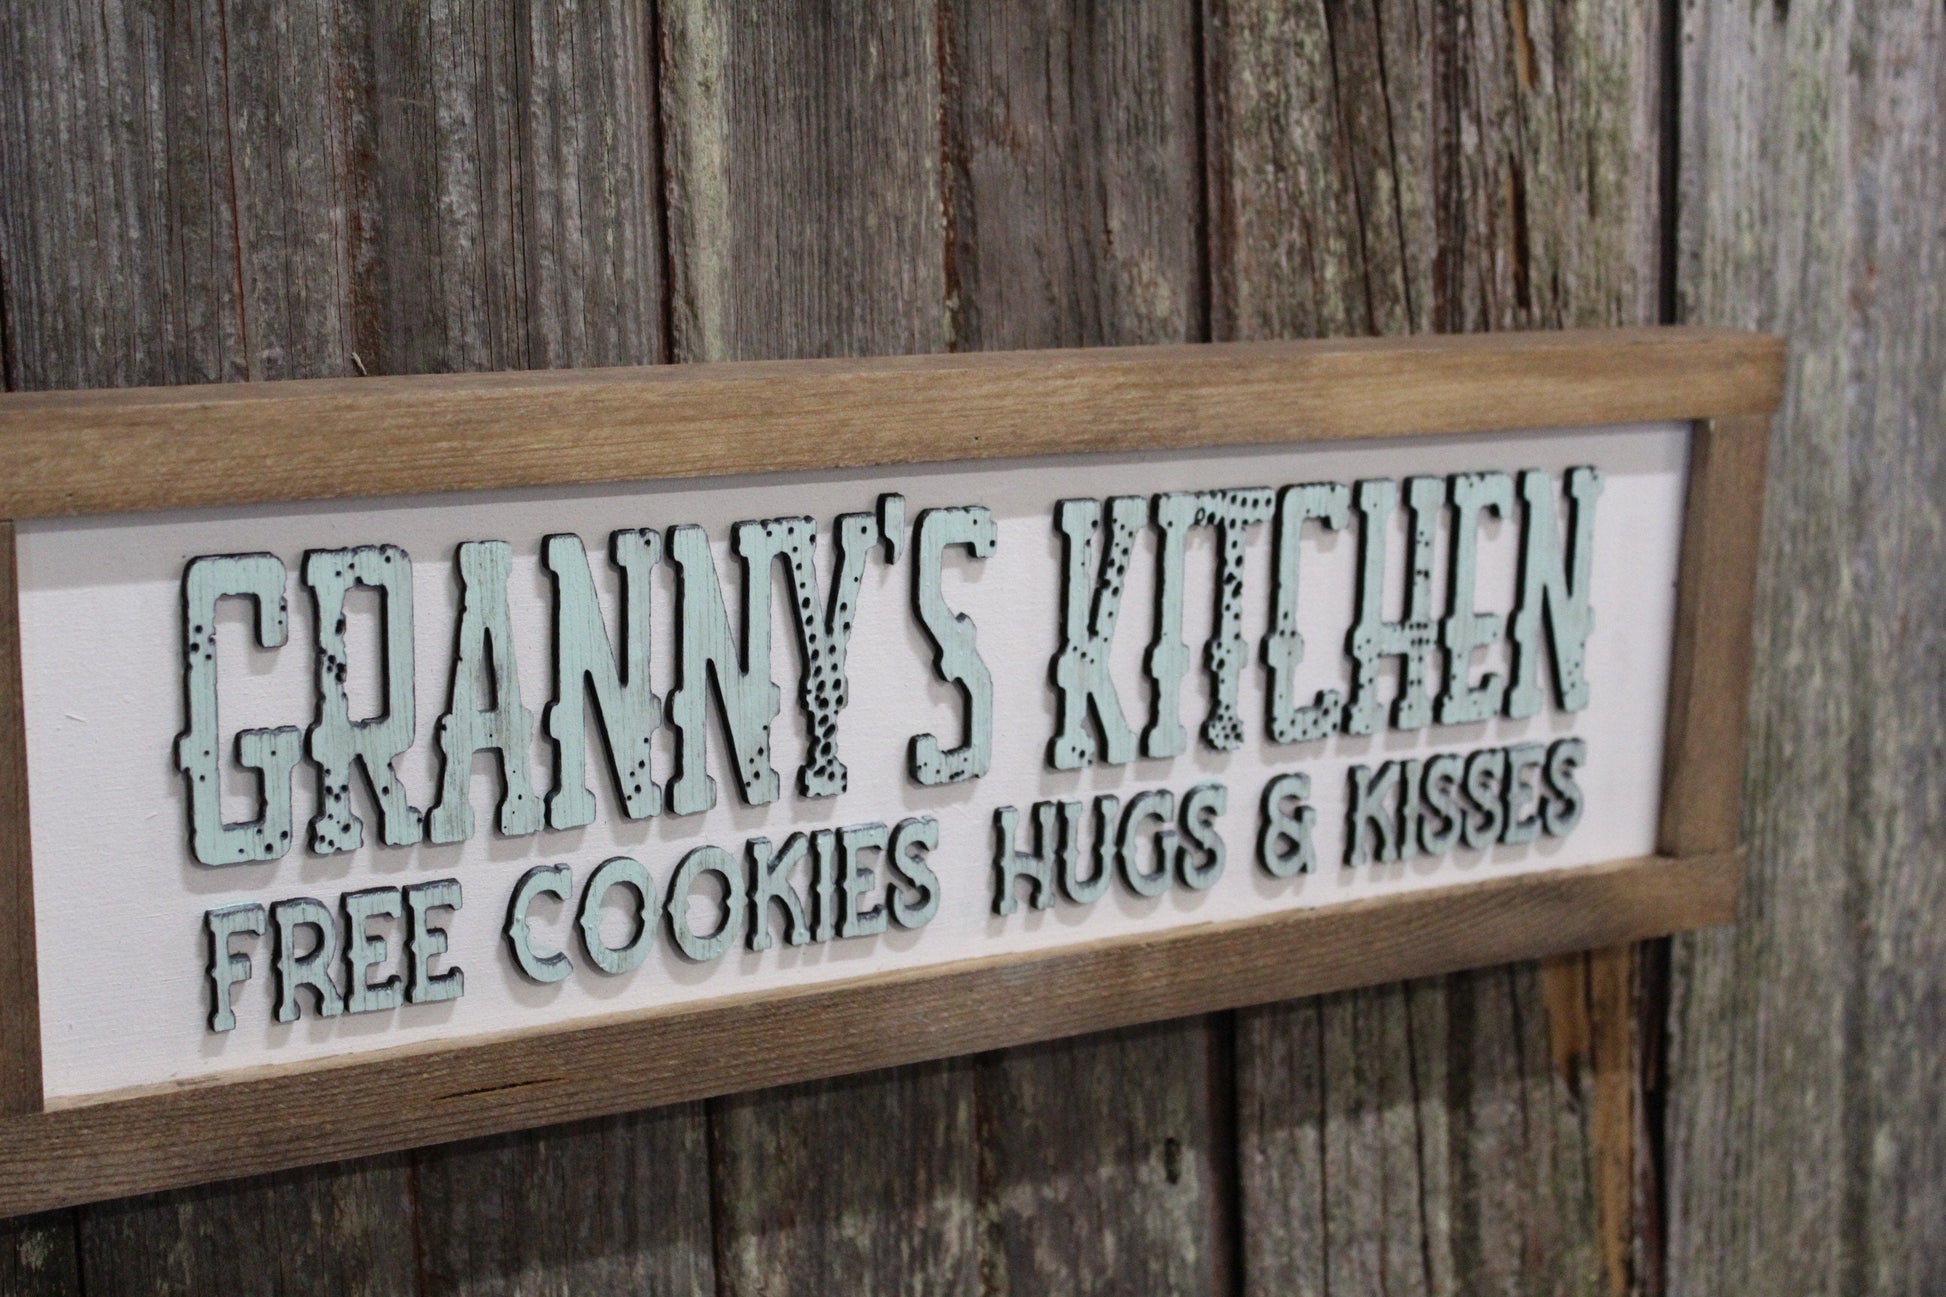 Granny's Kitchen Free Cookies Hugs & Kisses Wood Sign Grandma Mothers Day Gift Pastel 3D Raised Text Farmhouse Handmade Rustic Primitive